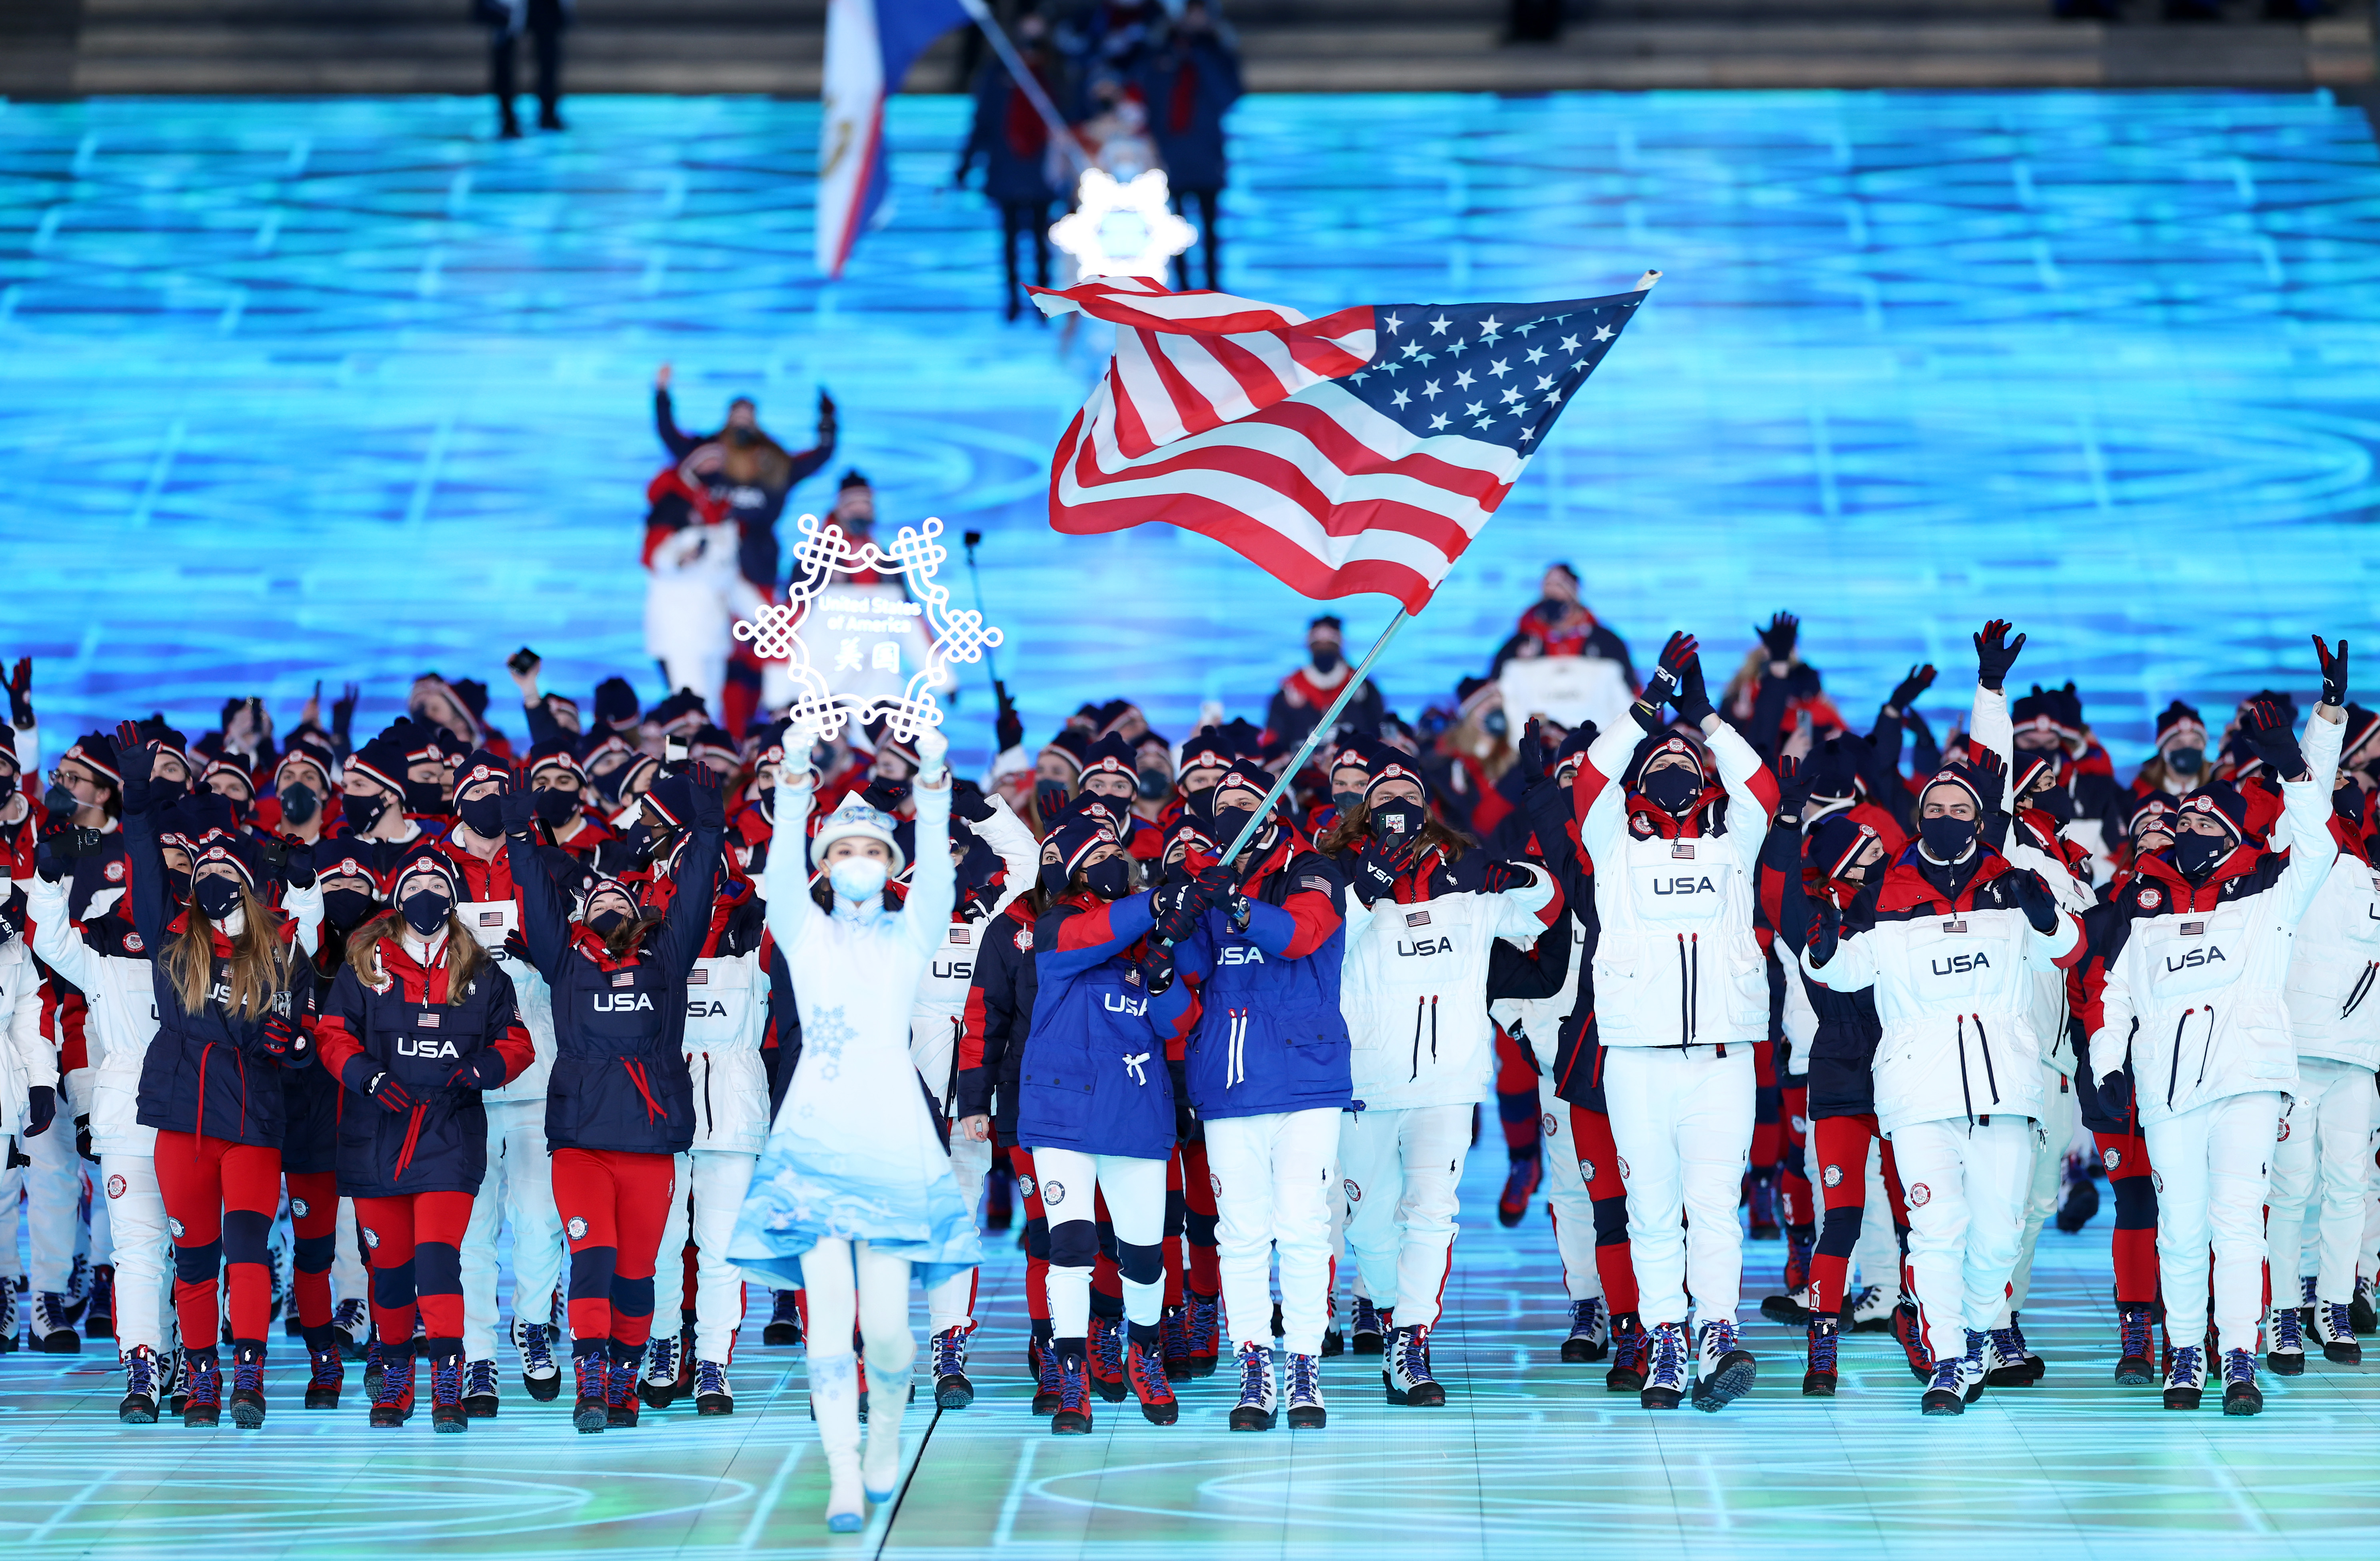 Flag bearers Brittany Bowe and John Shuster of Team United States carry their flag during the Opening Ceremony of the Beijing 2022 Winter Olympics at the Beijing National Stadium on February 04 in Beijing, China.